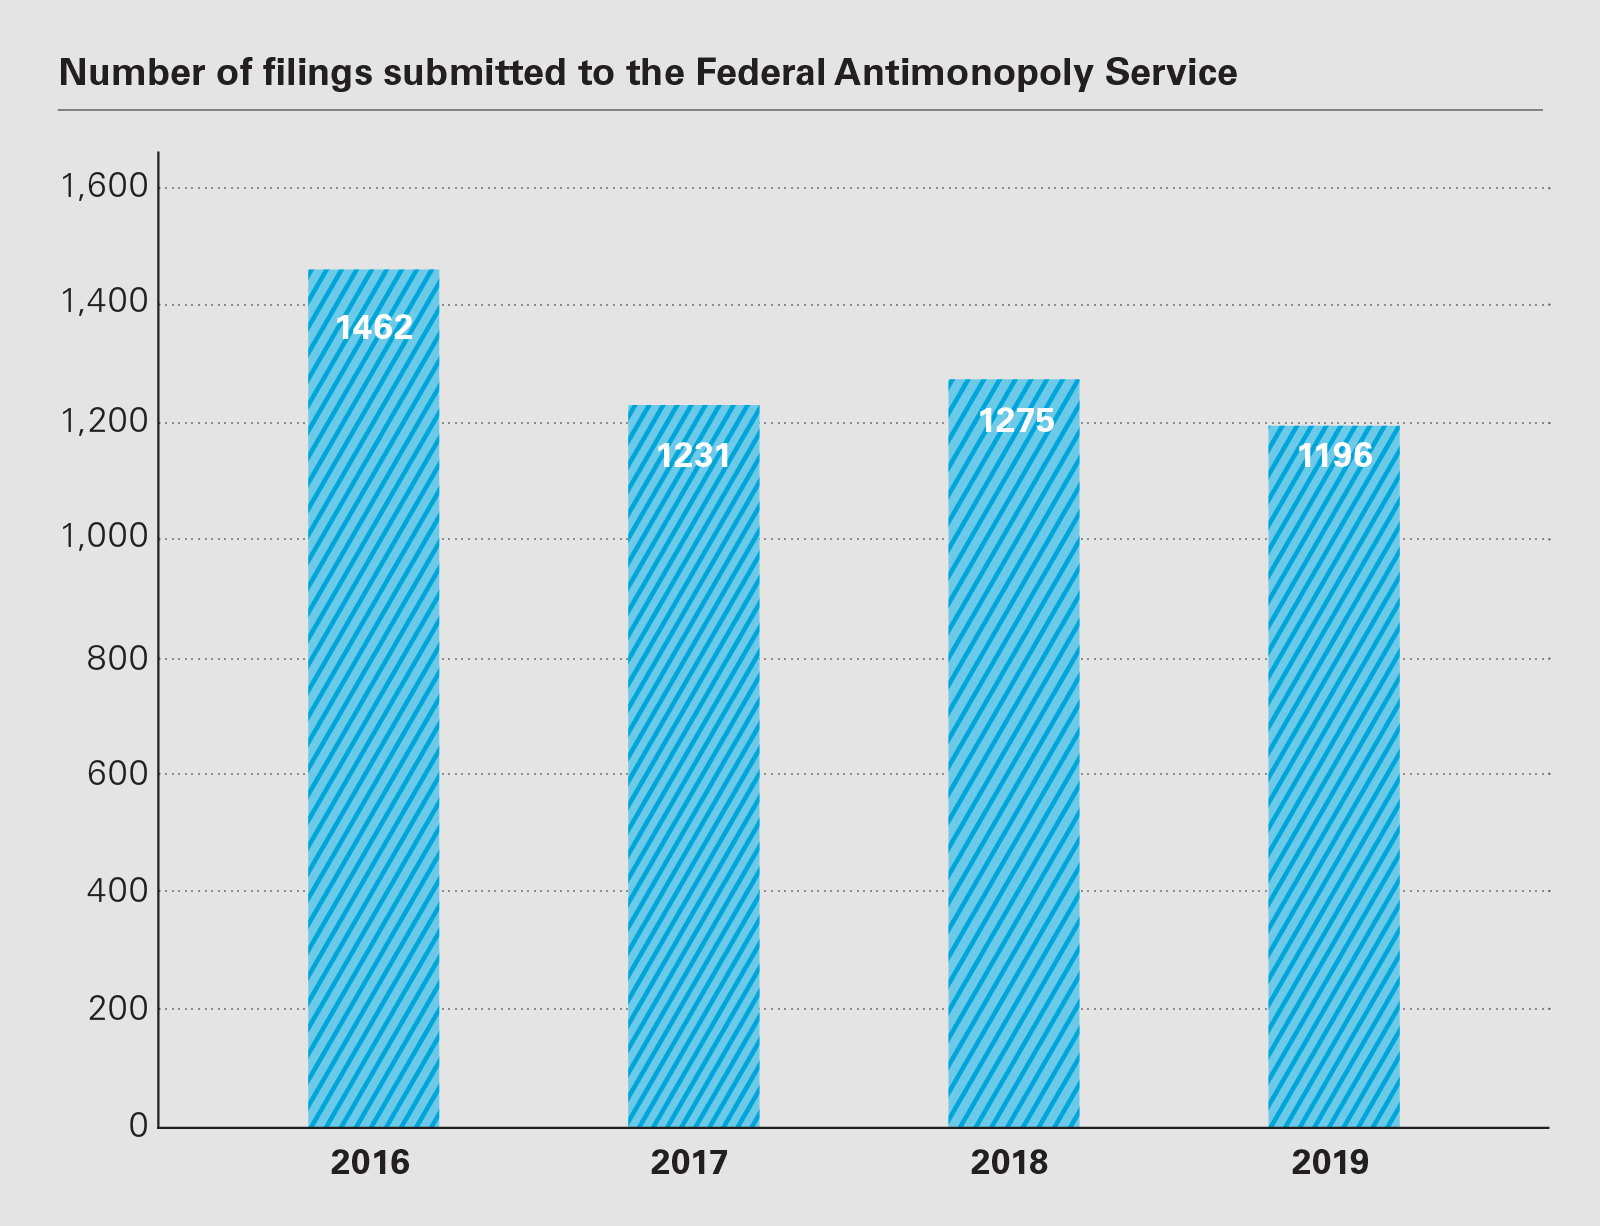 Number of filings submitted to the Federal Antimonopoly Service (PDF)